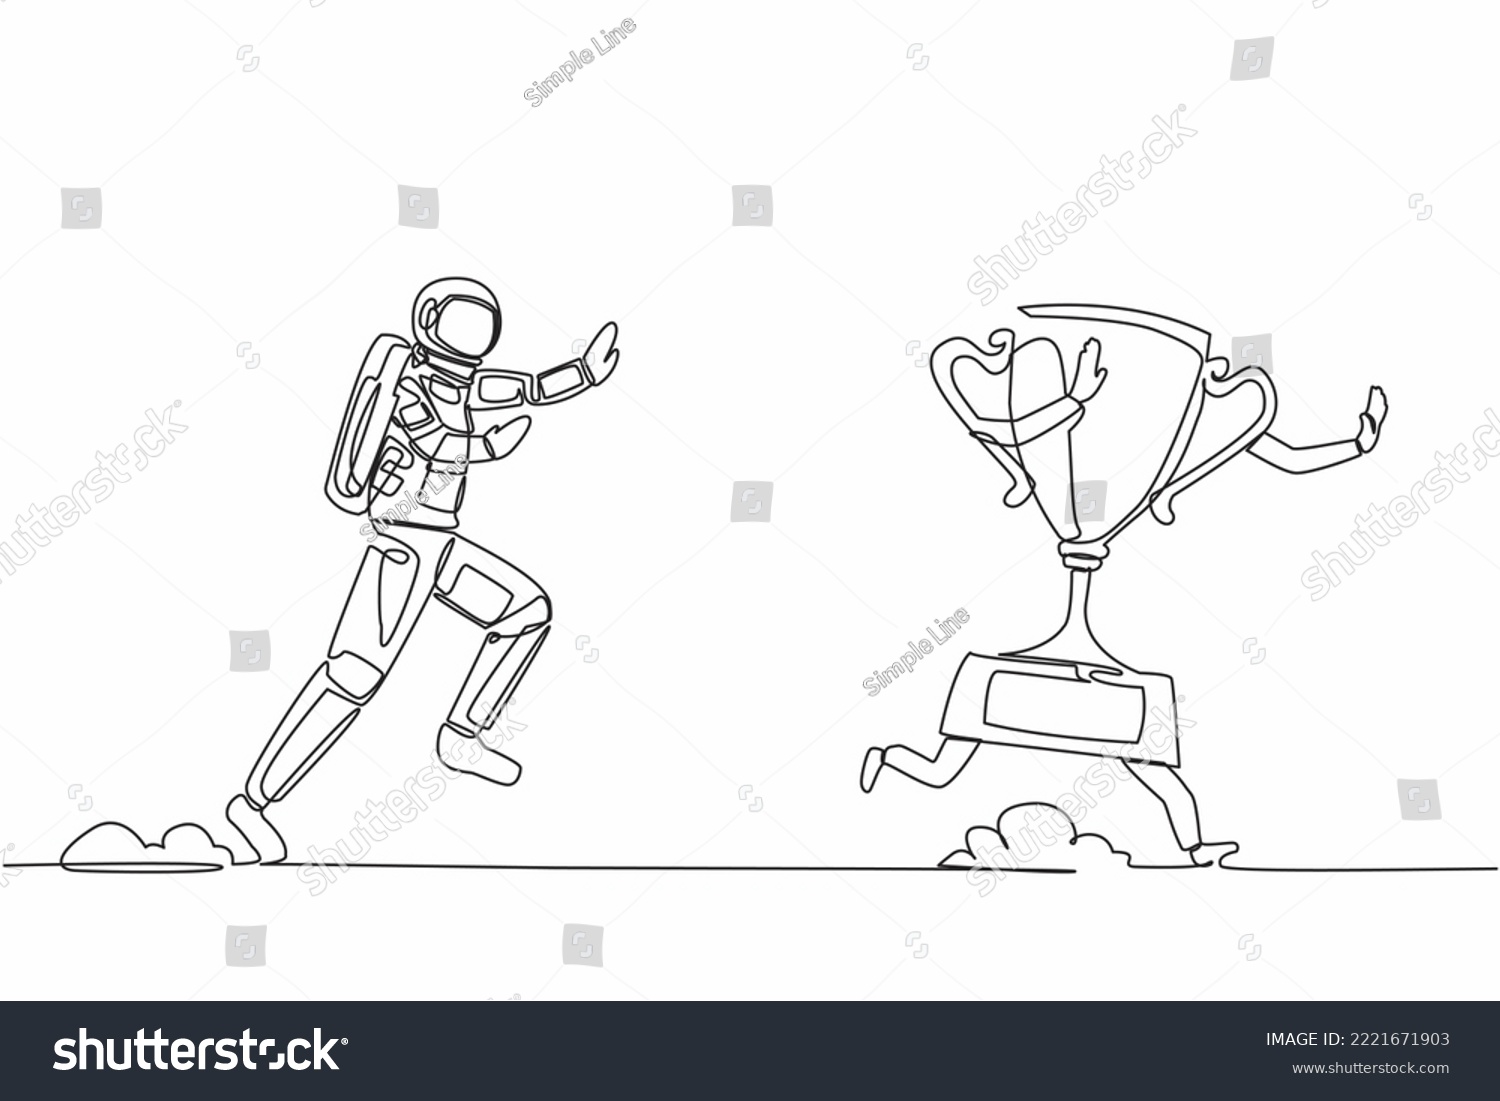 SVG of Single one line drawing young astronaut run chasing trophy in moon surface. Victory and award for galactic exploration. Cosmic galaxy space concept. Continuous line graphic design vector illustration svg